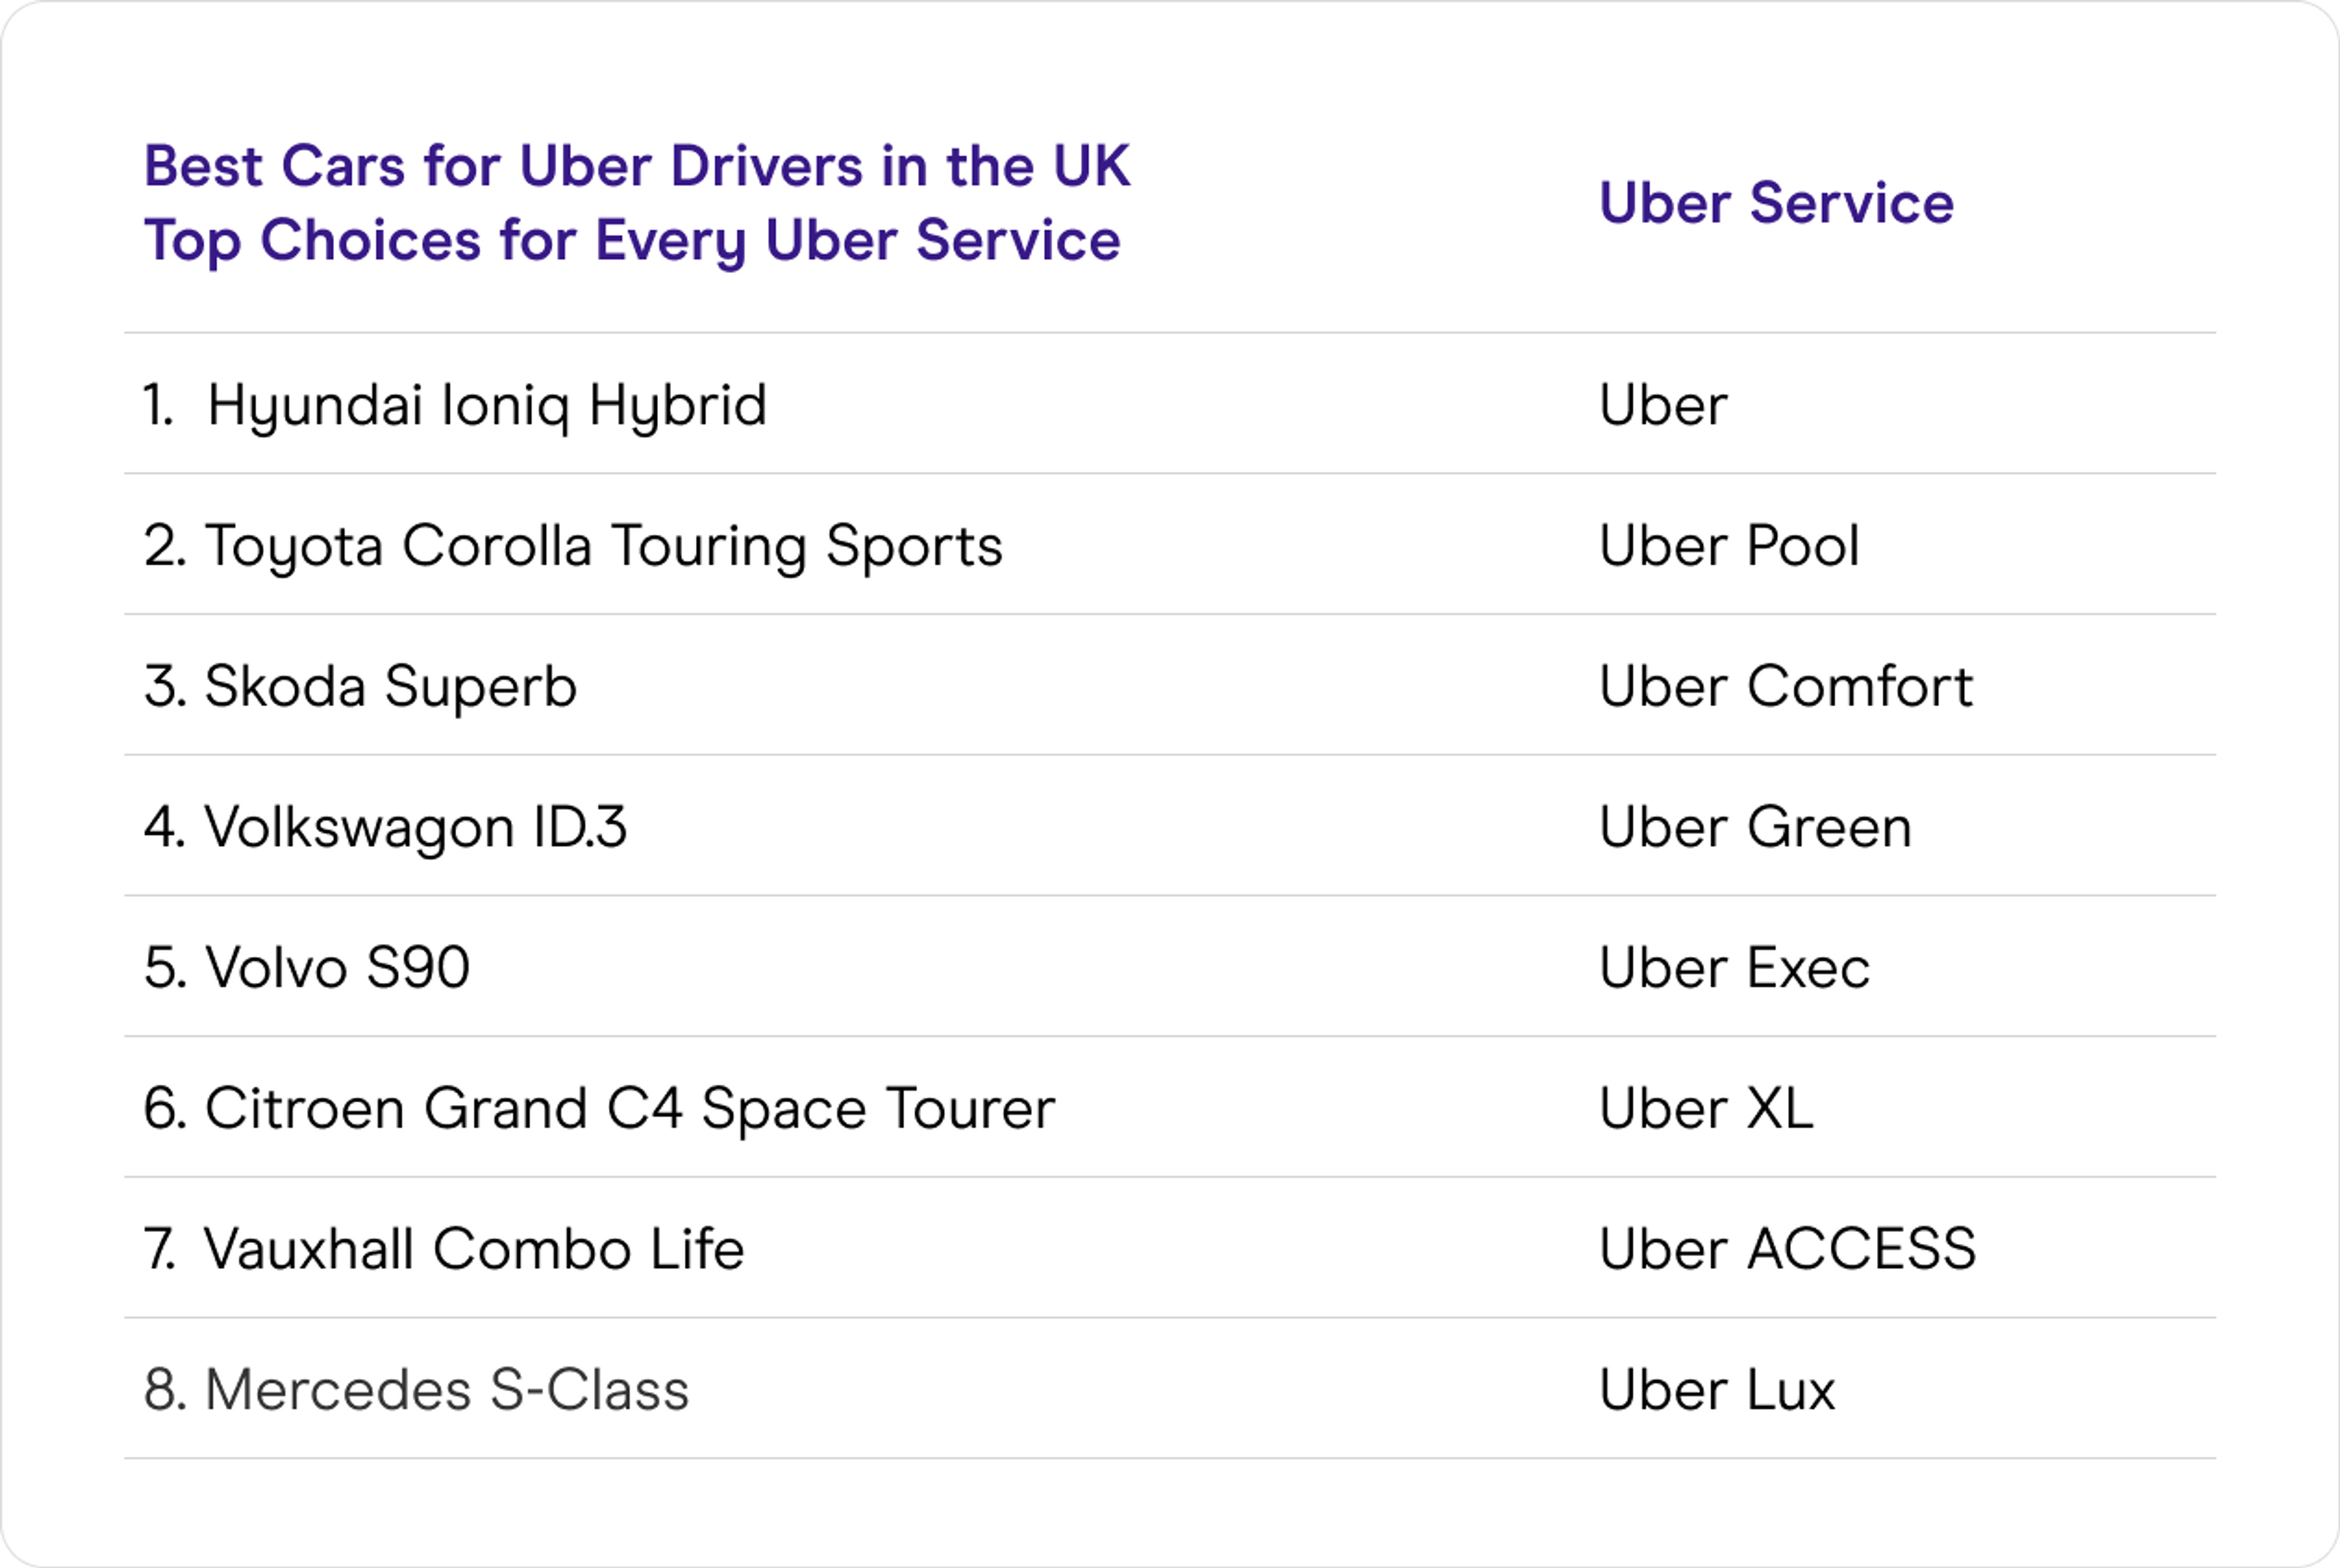 table showing the best cars for Uber drivers and which Uber service they are suited for